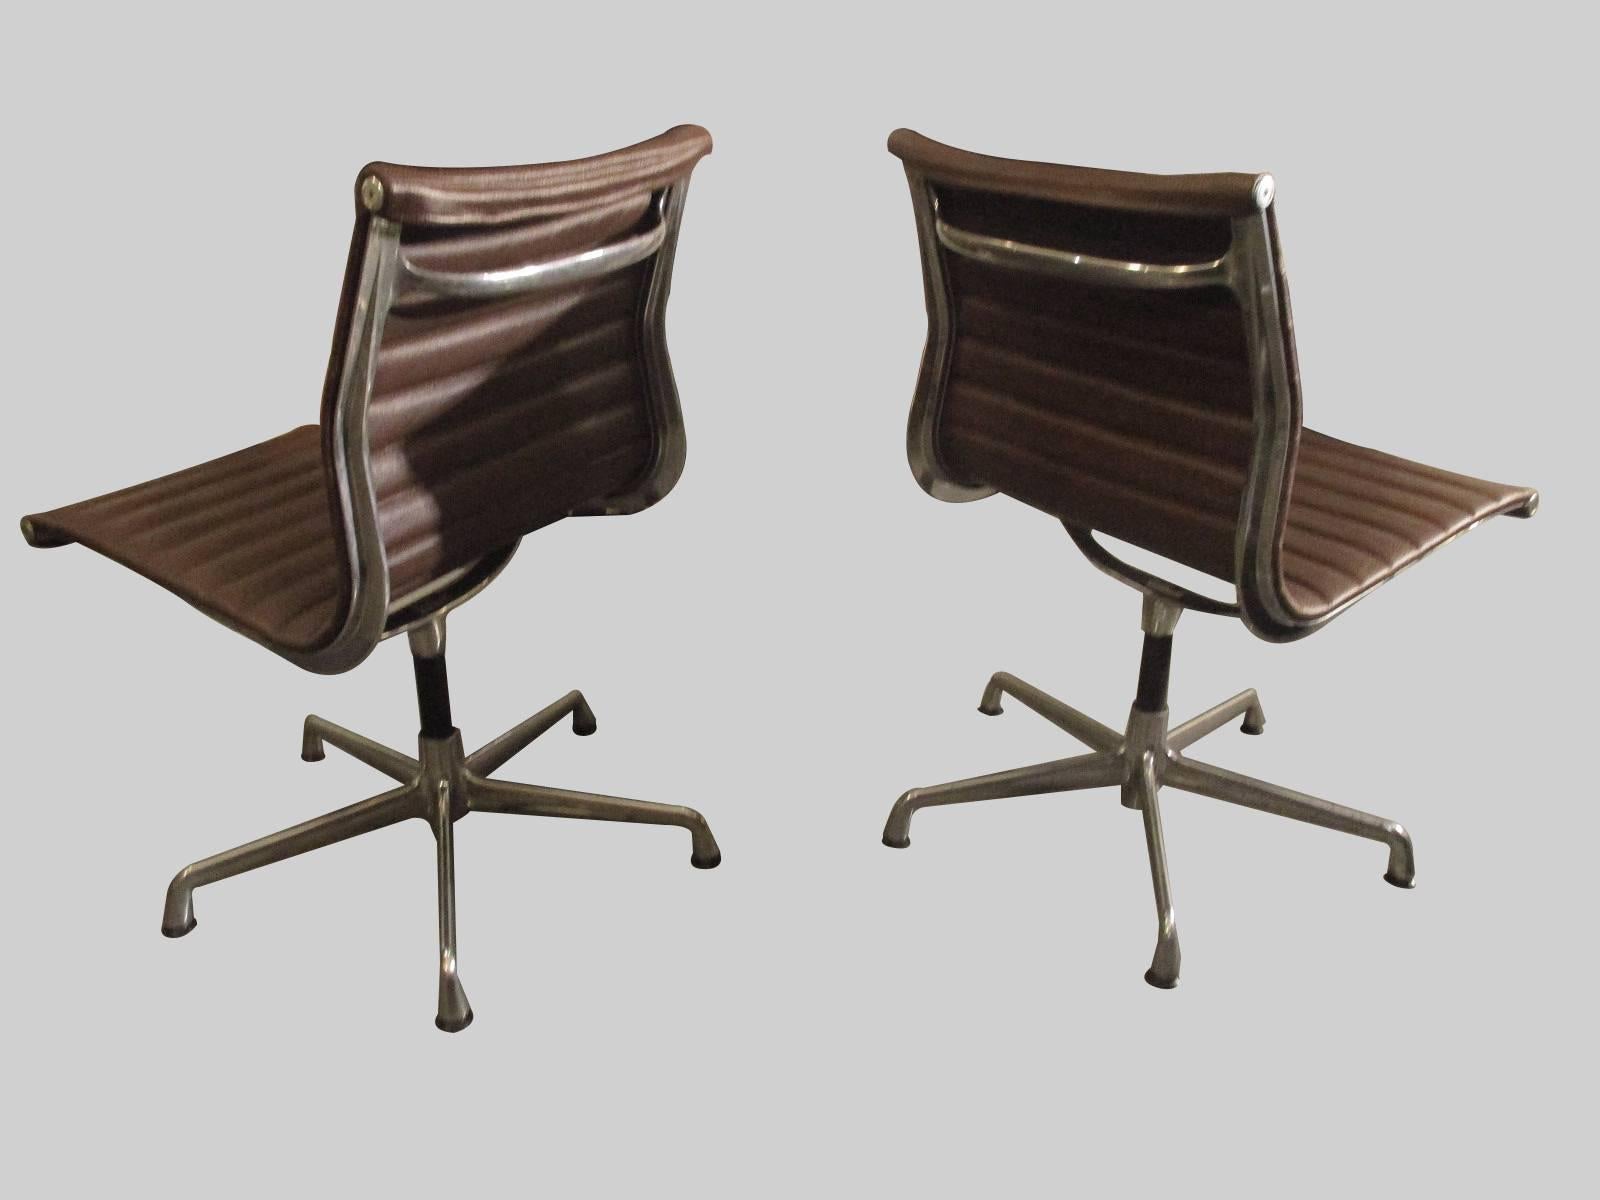 Eames Aluminium Group Armless Chairs for Herman Miller Refurbished with Leather In Good Condition For Sale In 0, Cuauhtemoc